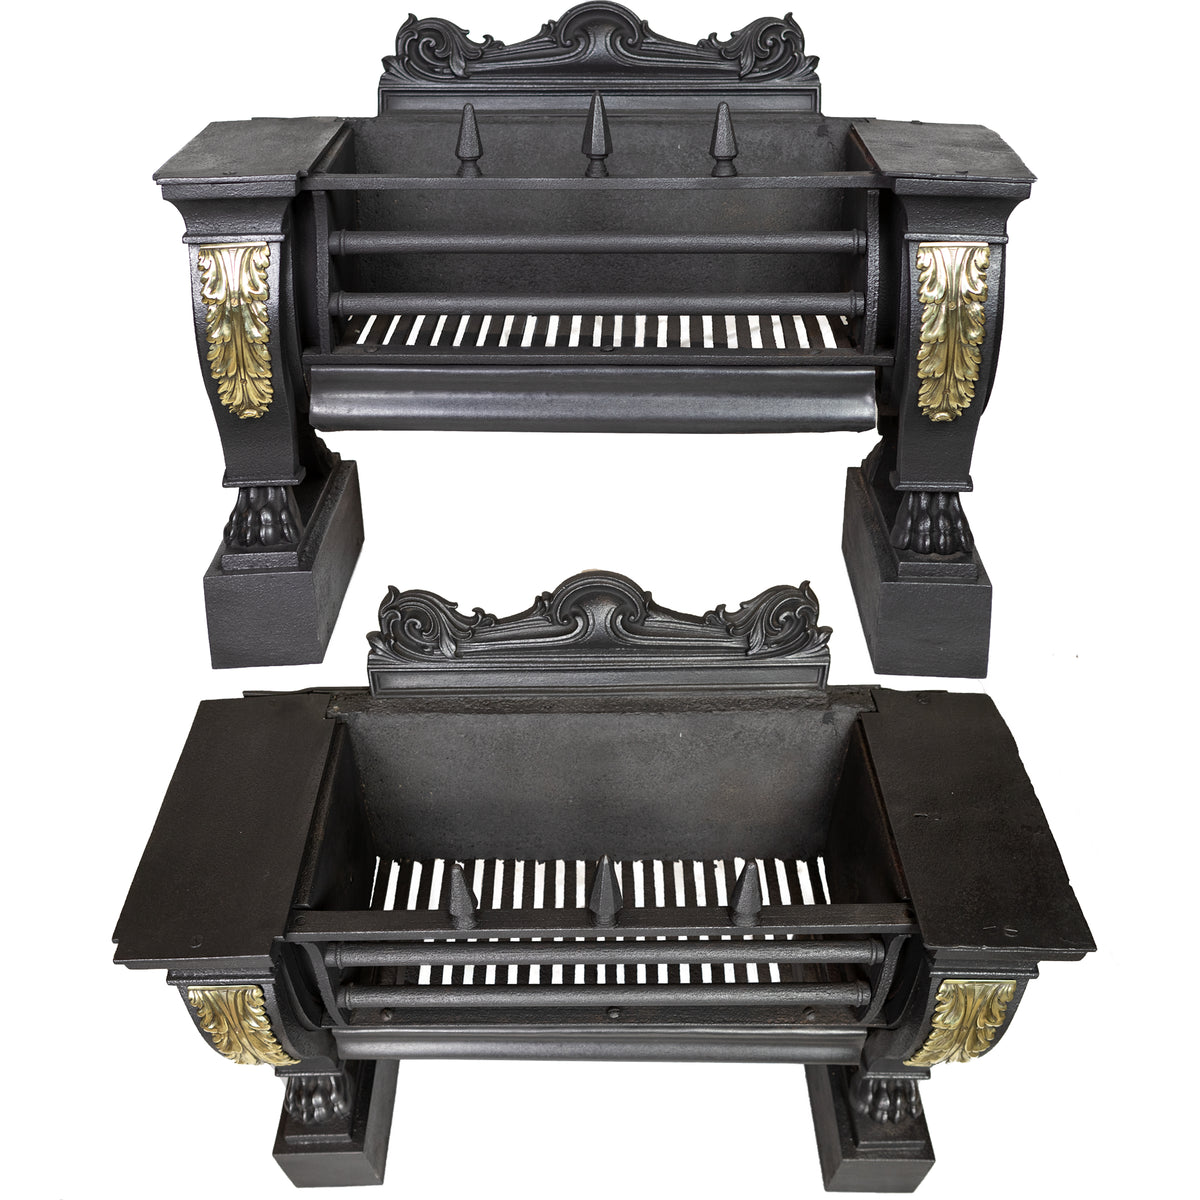 Antique Regency Hob Grate In The Manner of George Bullock | The Architectural Forum